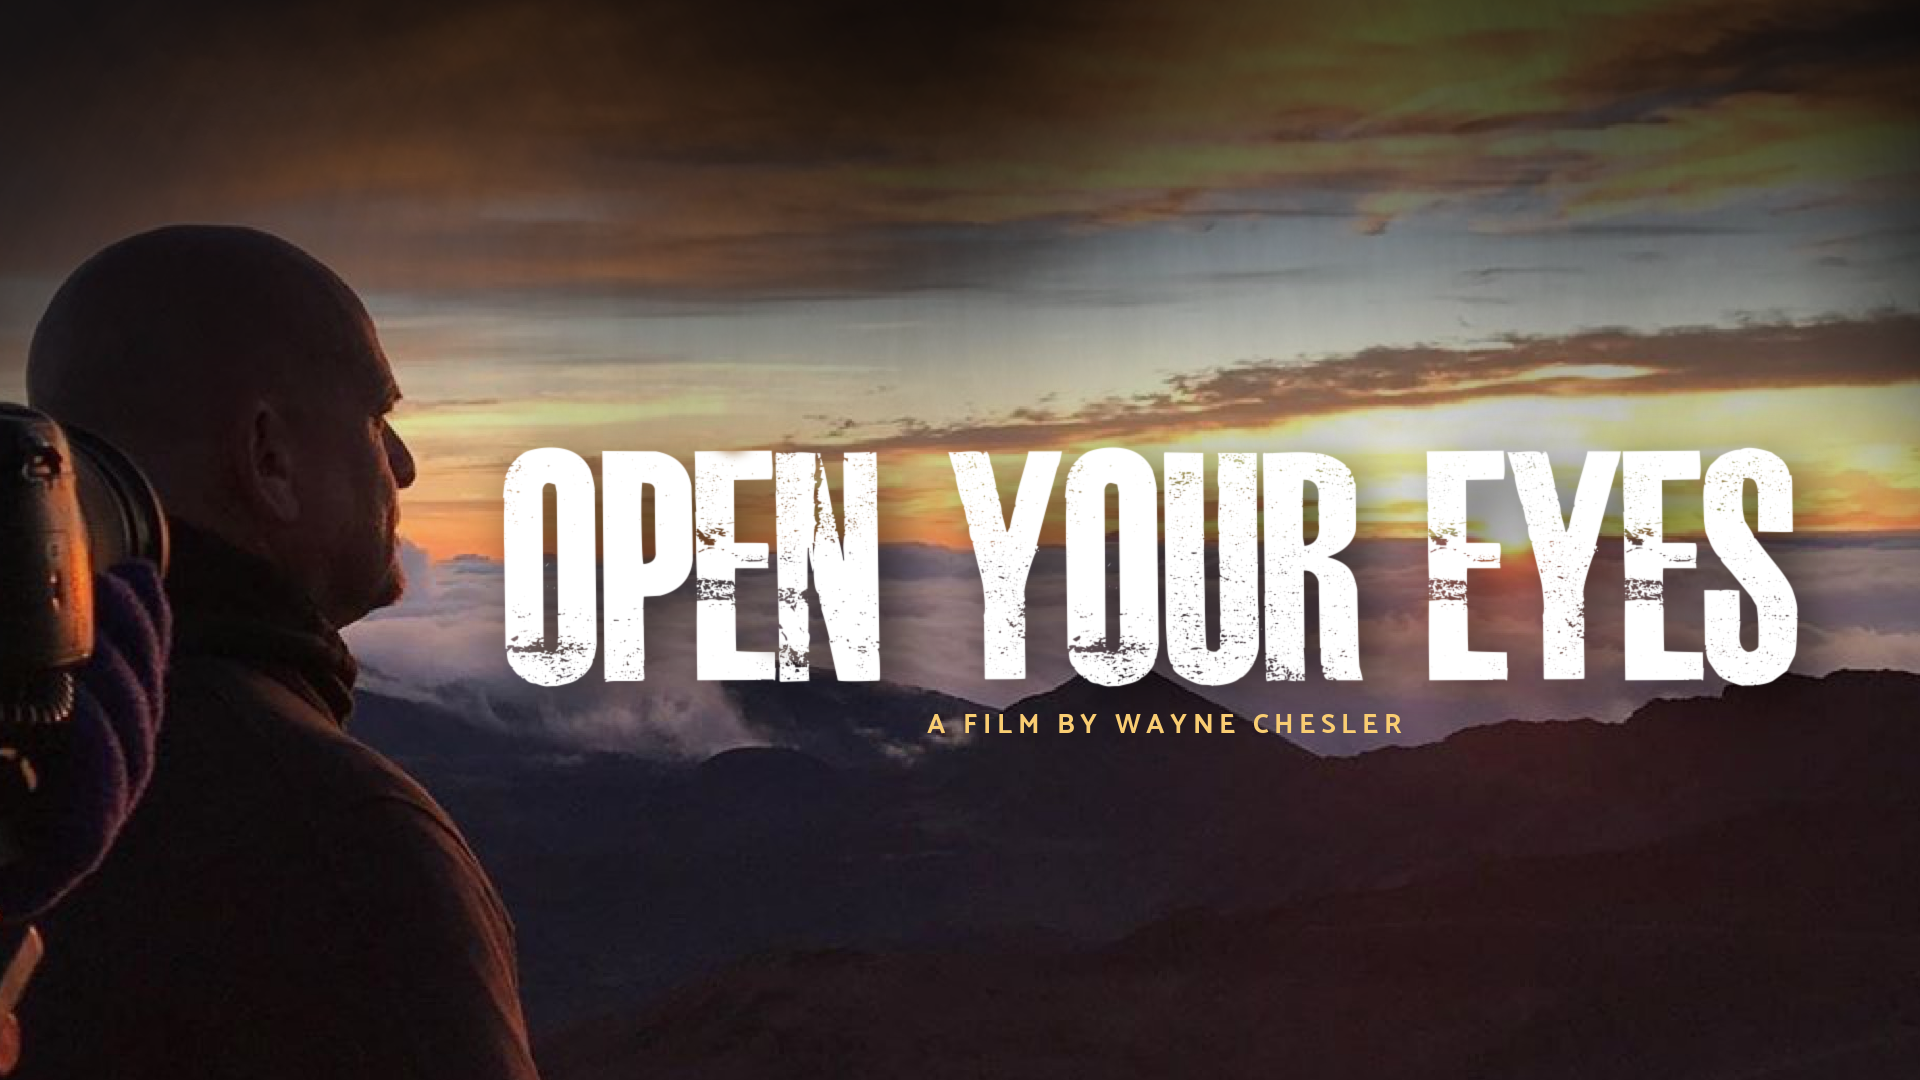 New Documentary, “Open Your Eyes” Uncovers the Optometrist’s Major Role in Preventing Disease